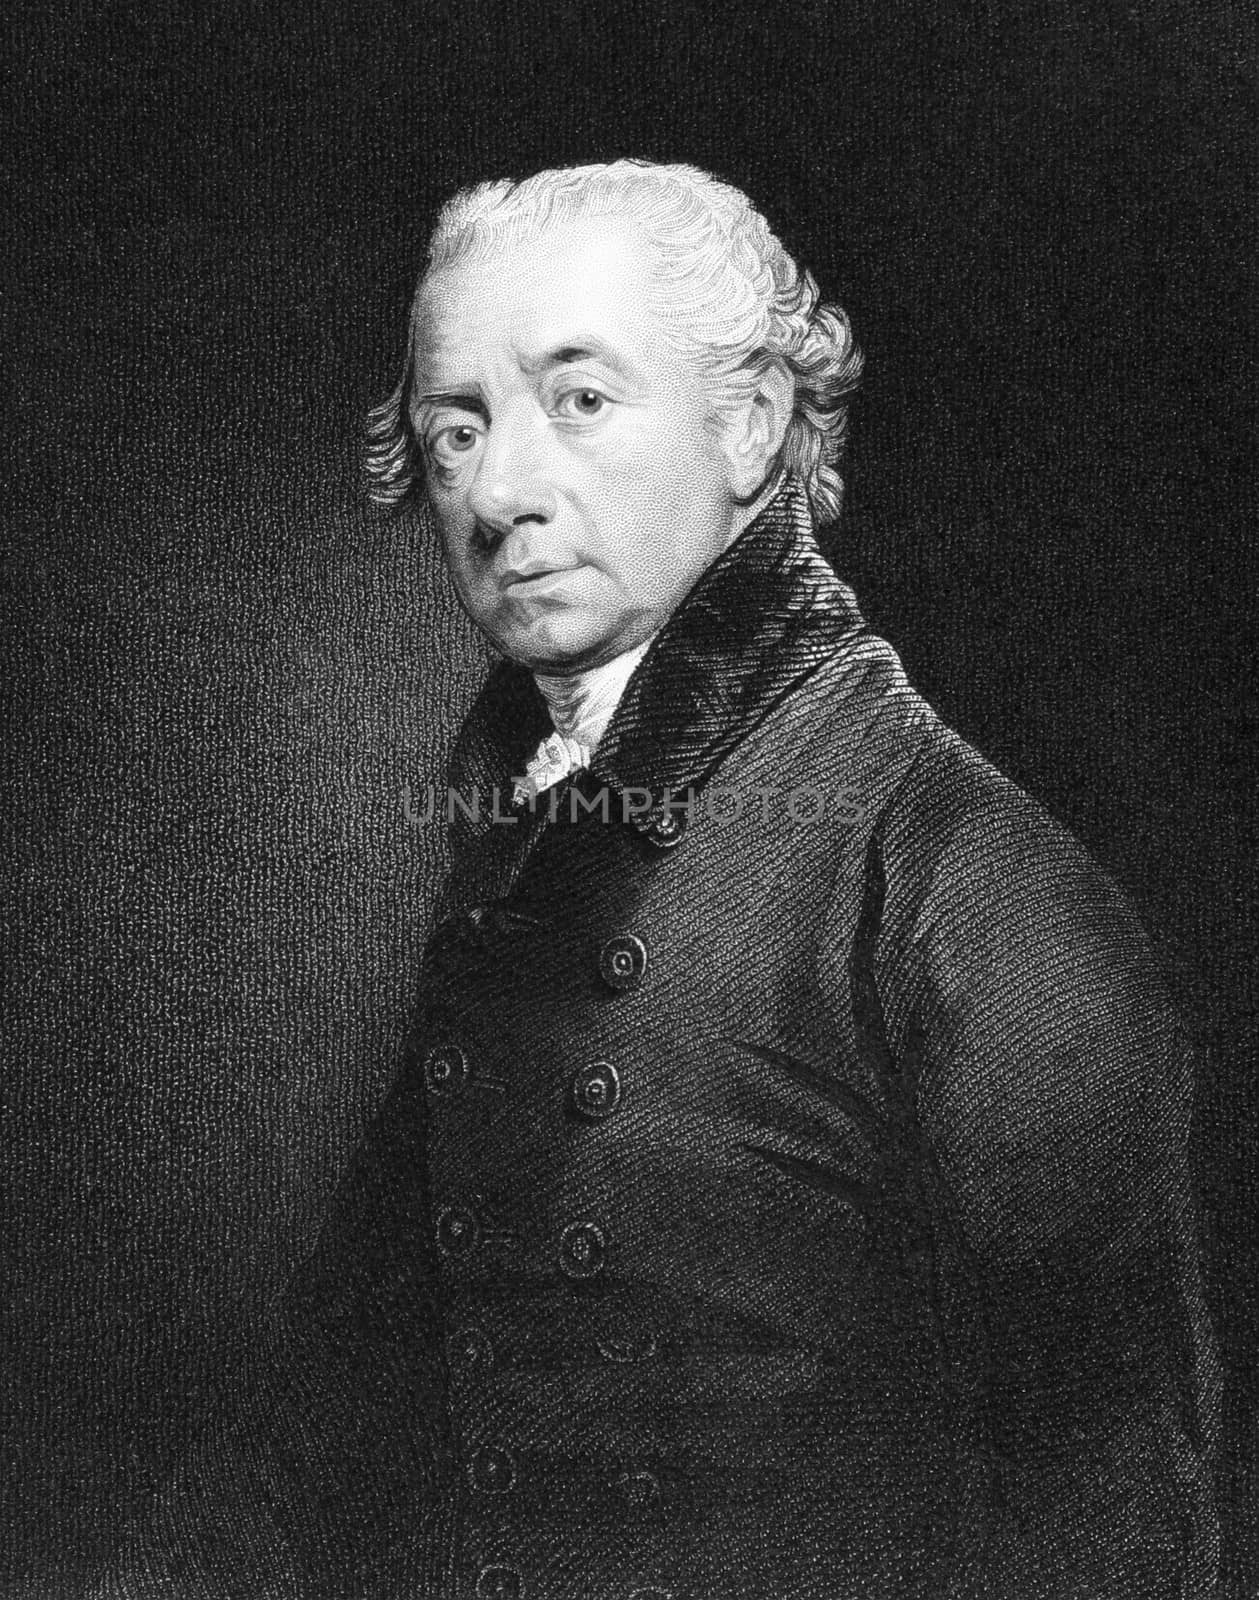 John Heaviside (1748-1828) on engraving from 1835. King's George III of England surgeon. Engraved by J.Cochran after W.Beechey and published in "National Portrait Gallery'',UK,1831.